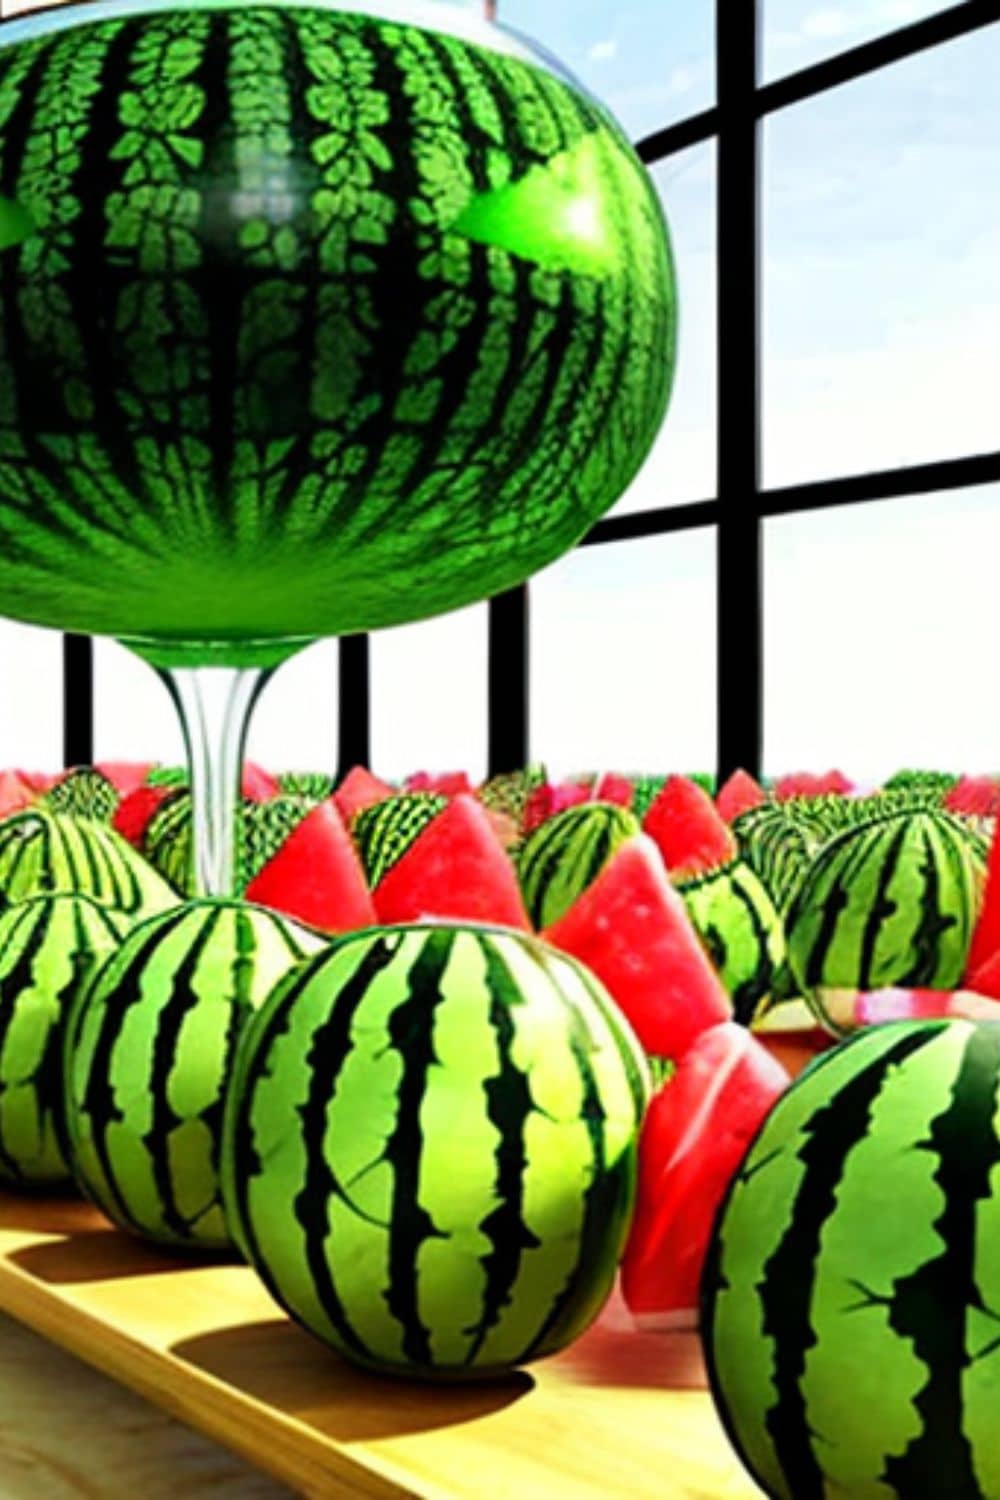 watermelon for watermelon cocktails and funny zany adventures